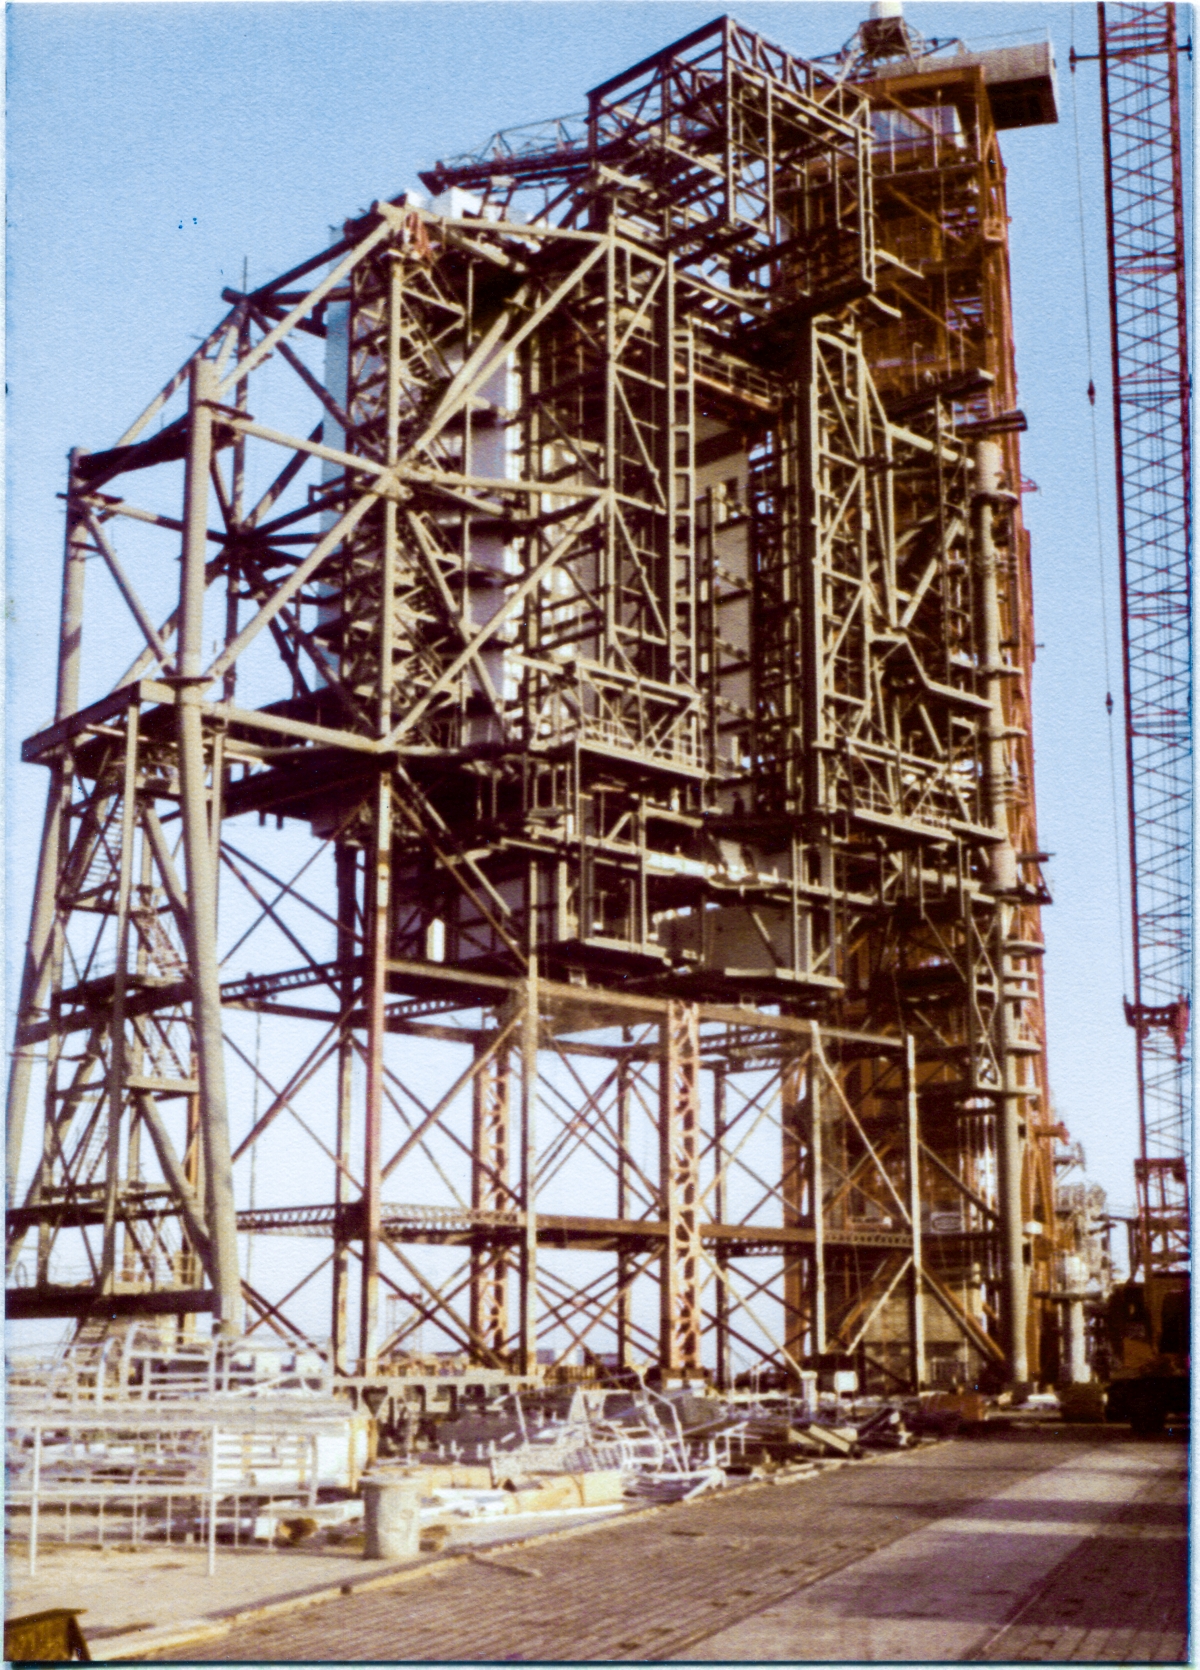 Launch Pad 39-B Construction Photos - Space Shuttle - Page 008